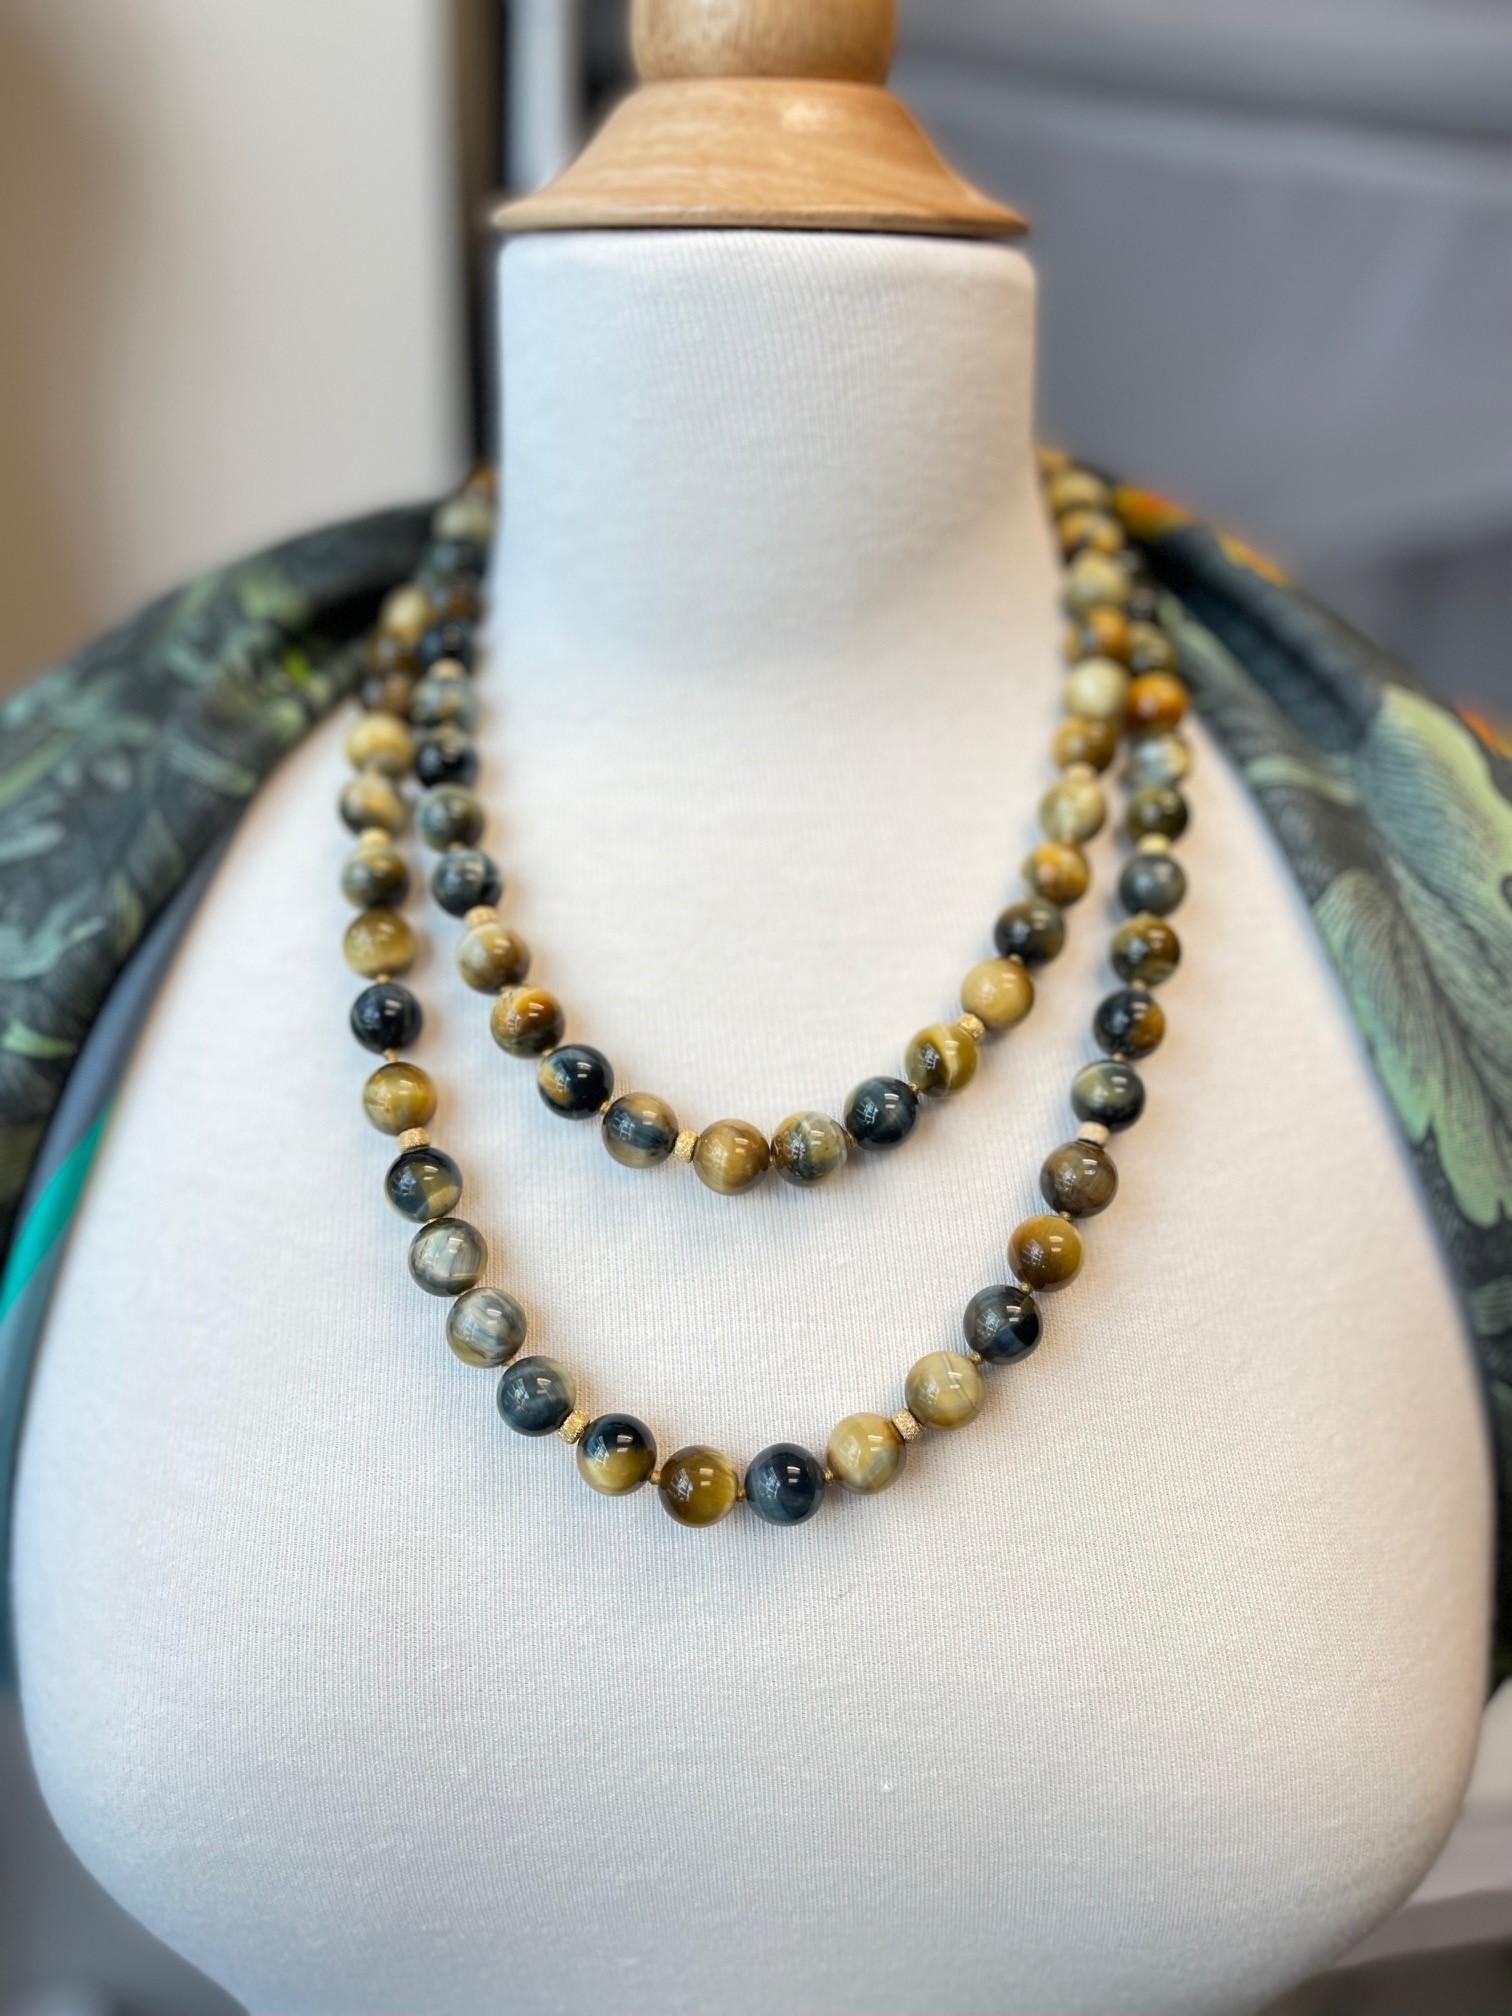 Women's or Men's Round Falcon, Cat's Eye Quartz Necklace with Yellow Gold Accents